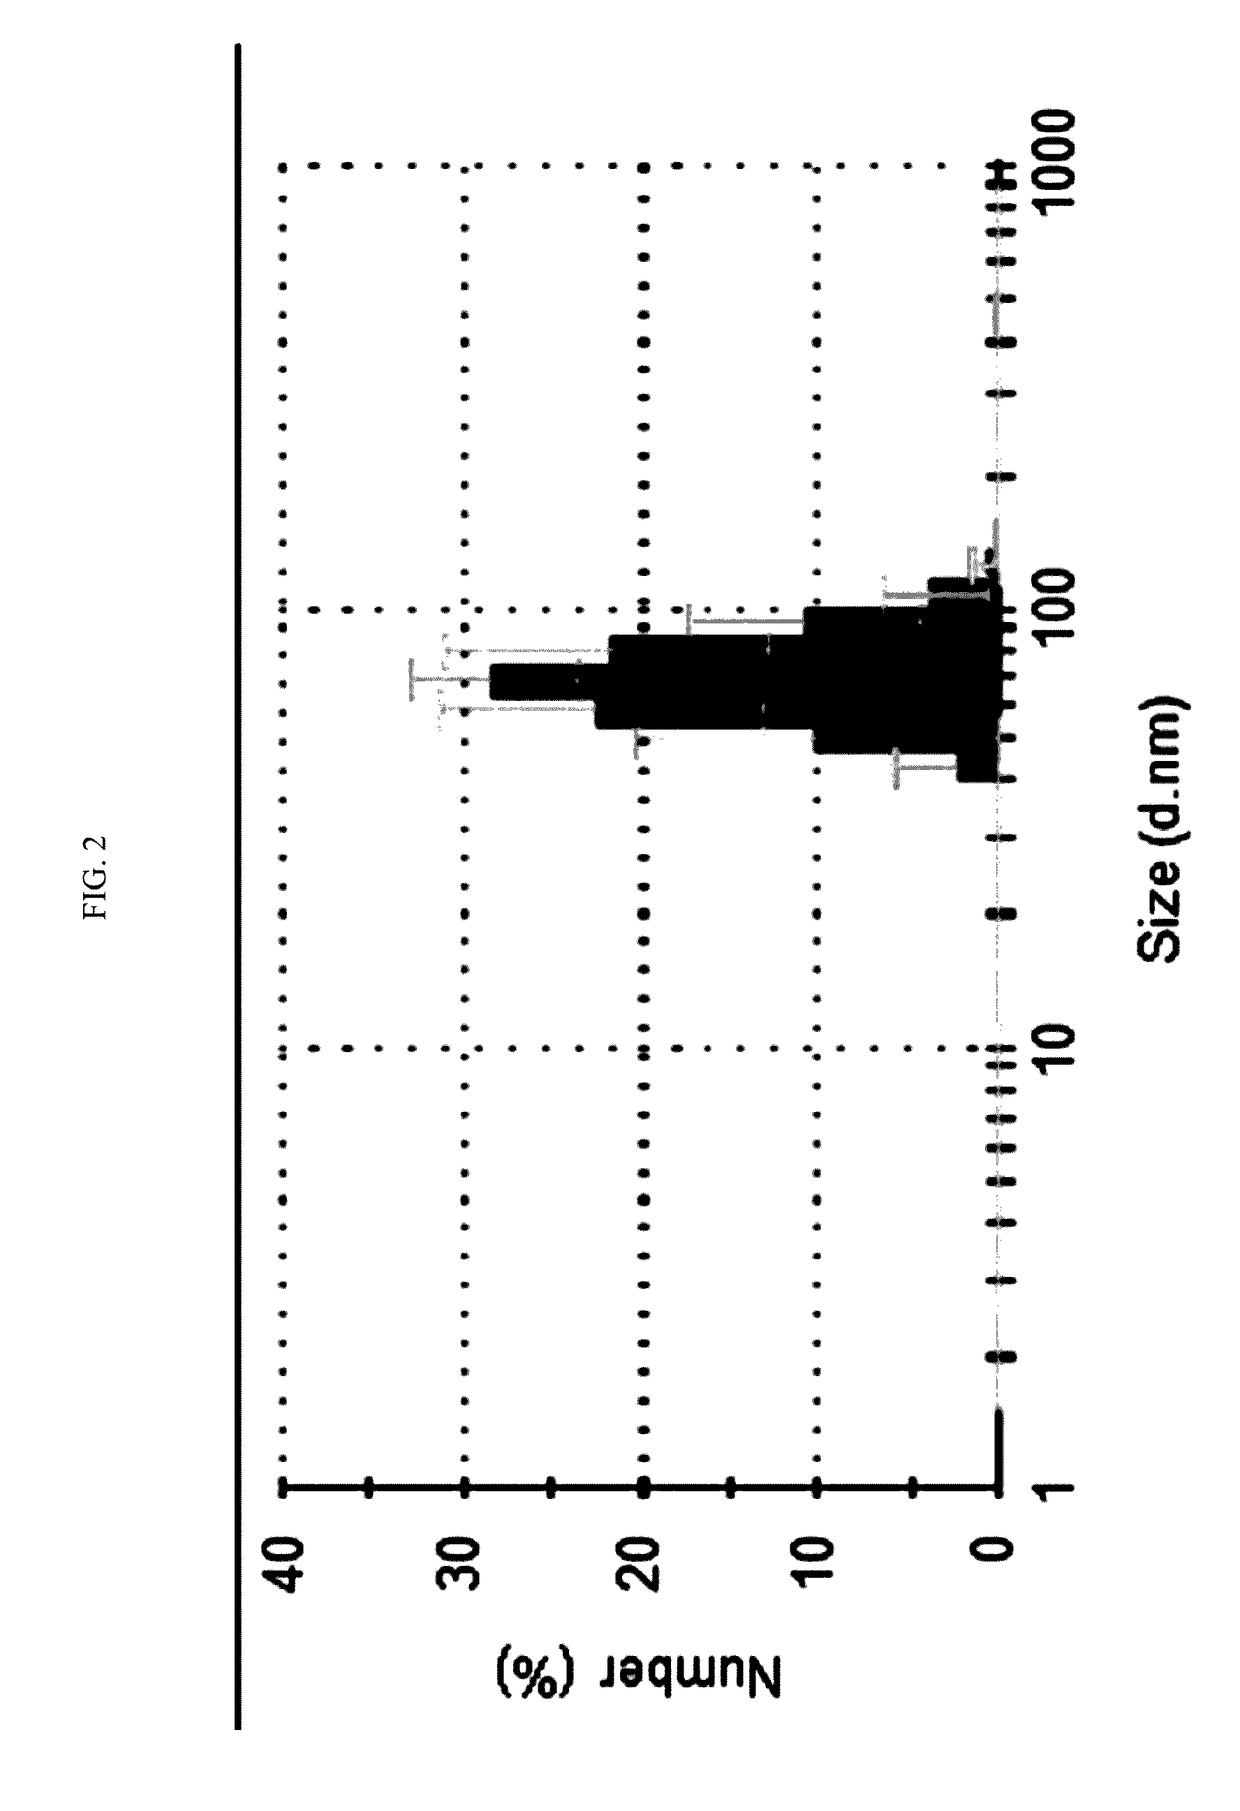 Composition for treating or preventing metabolic disease, containing, as active ingredient, extracellular vesicles derived from akkermansia muciniphila bacteria